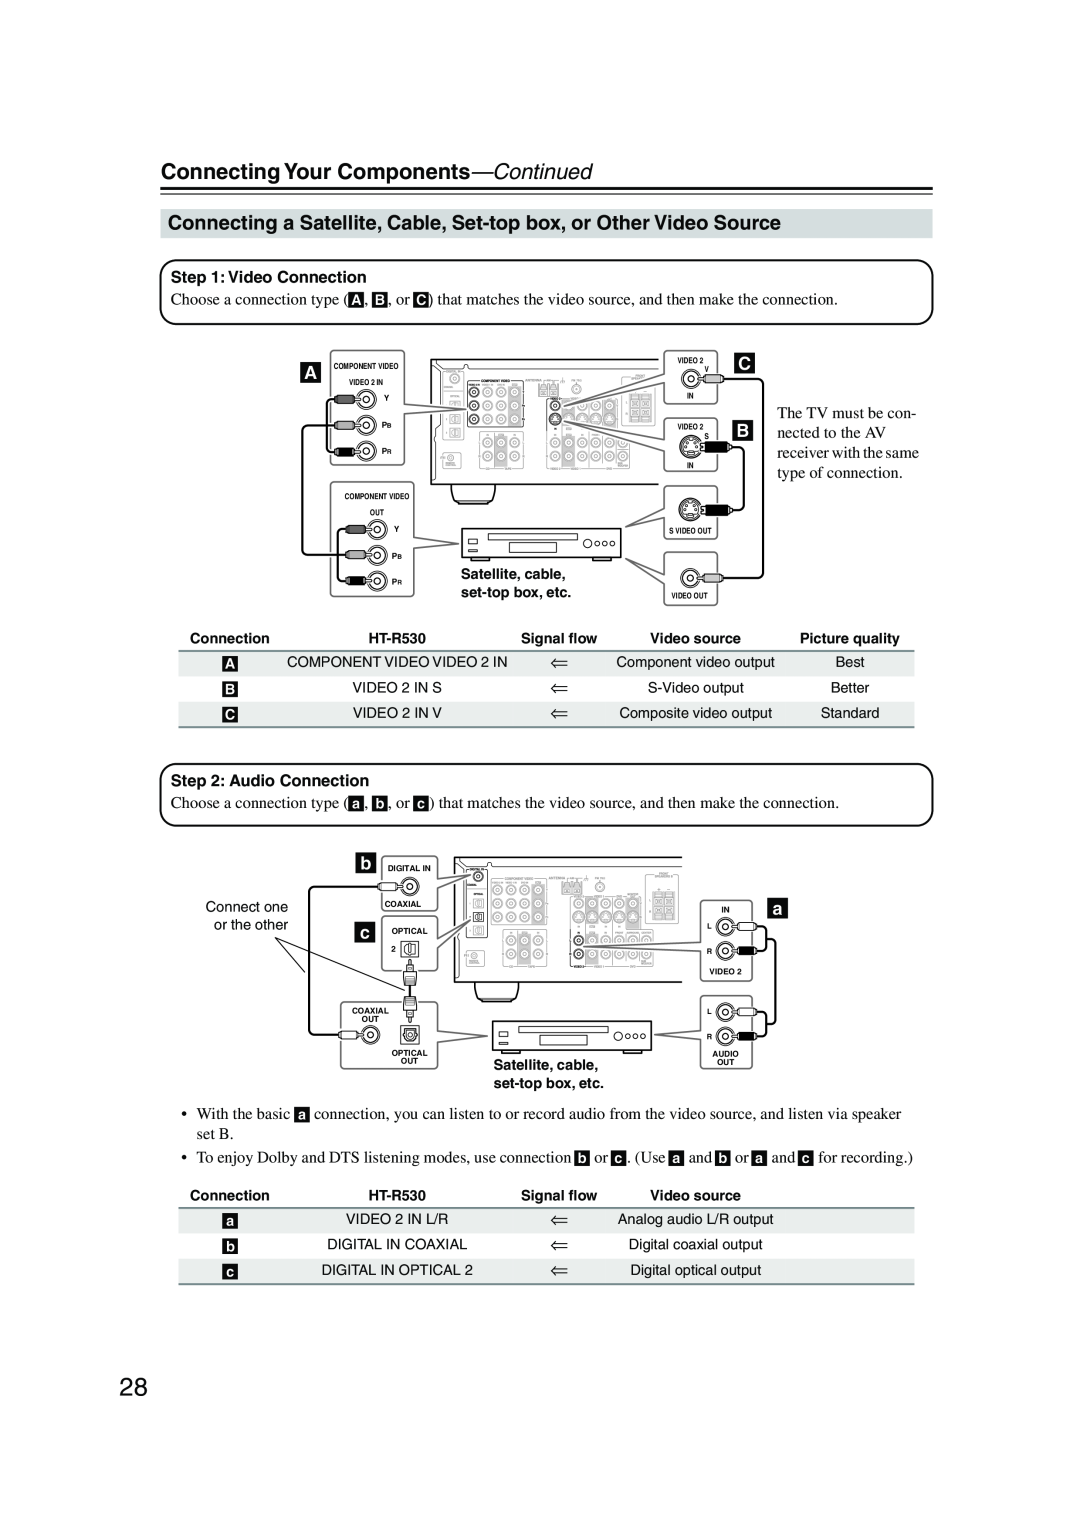 Onkyo HT-S780 instruction manual Connecting Your Components—Continued, Choose a connection type a 